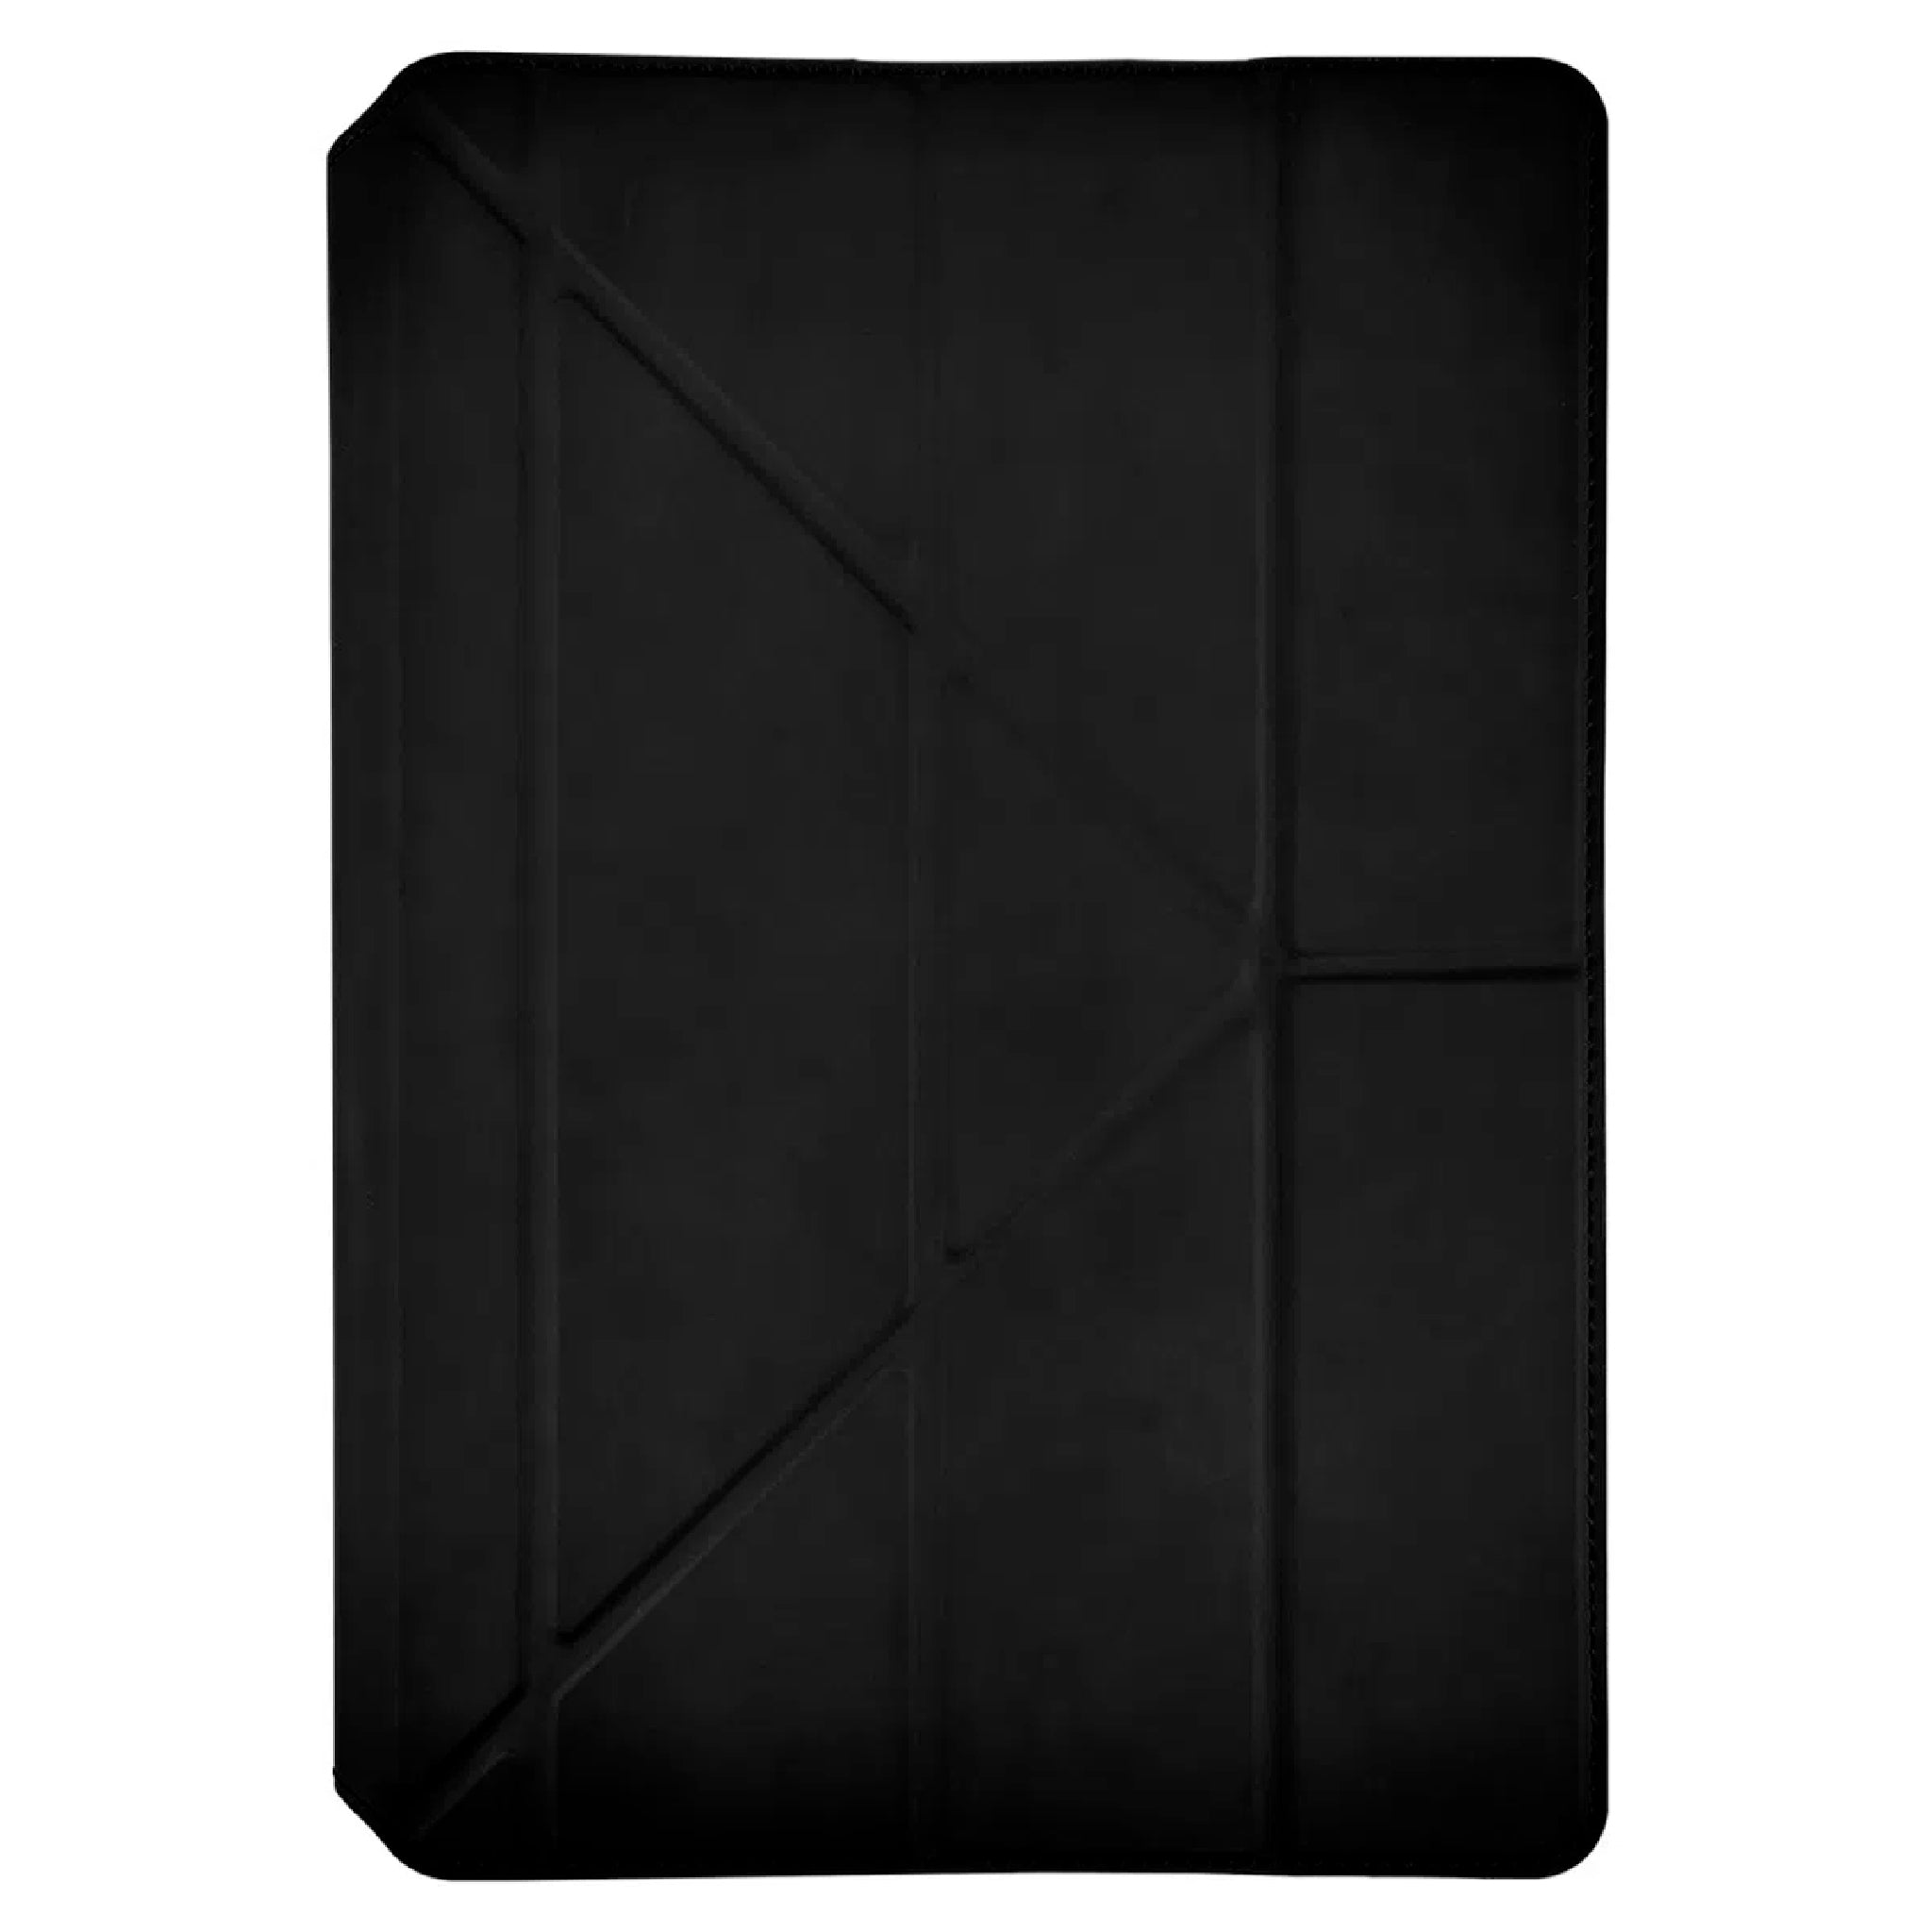 Itskins - Hexo Universal Folio Case For 9 To 10.5 Inch Tablets - Black